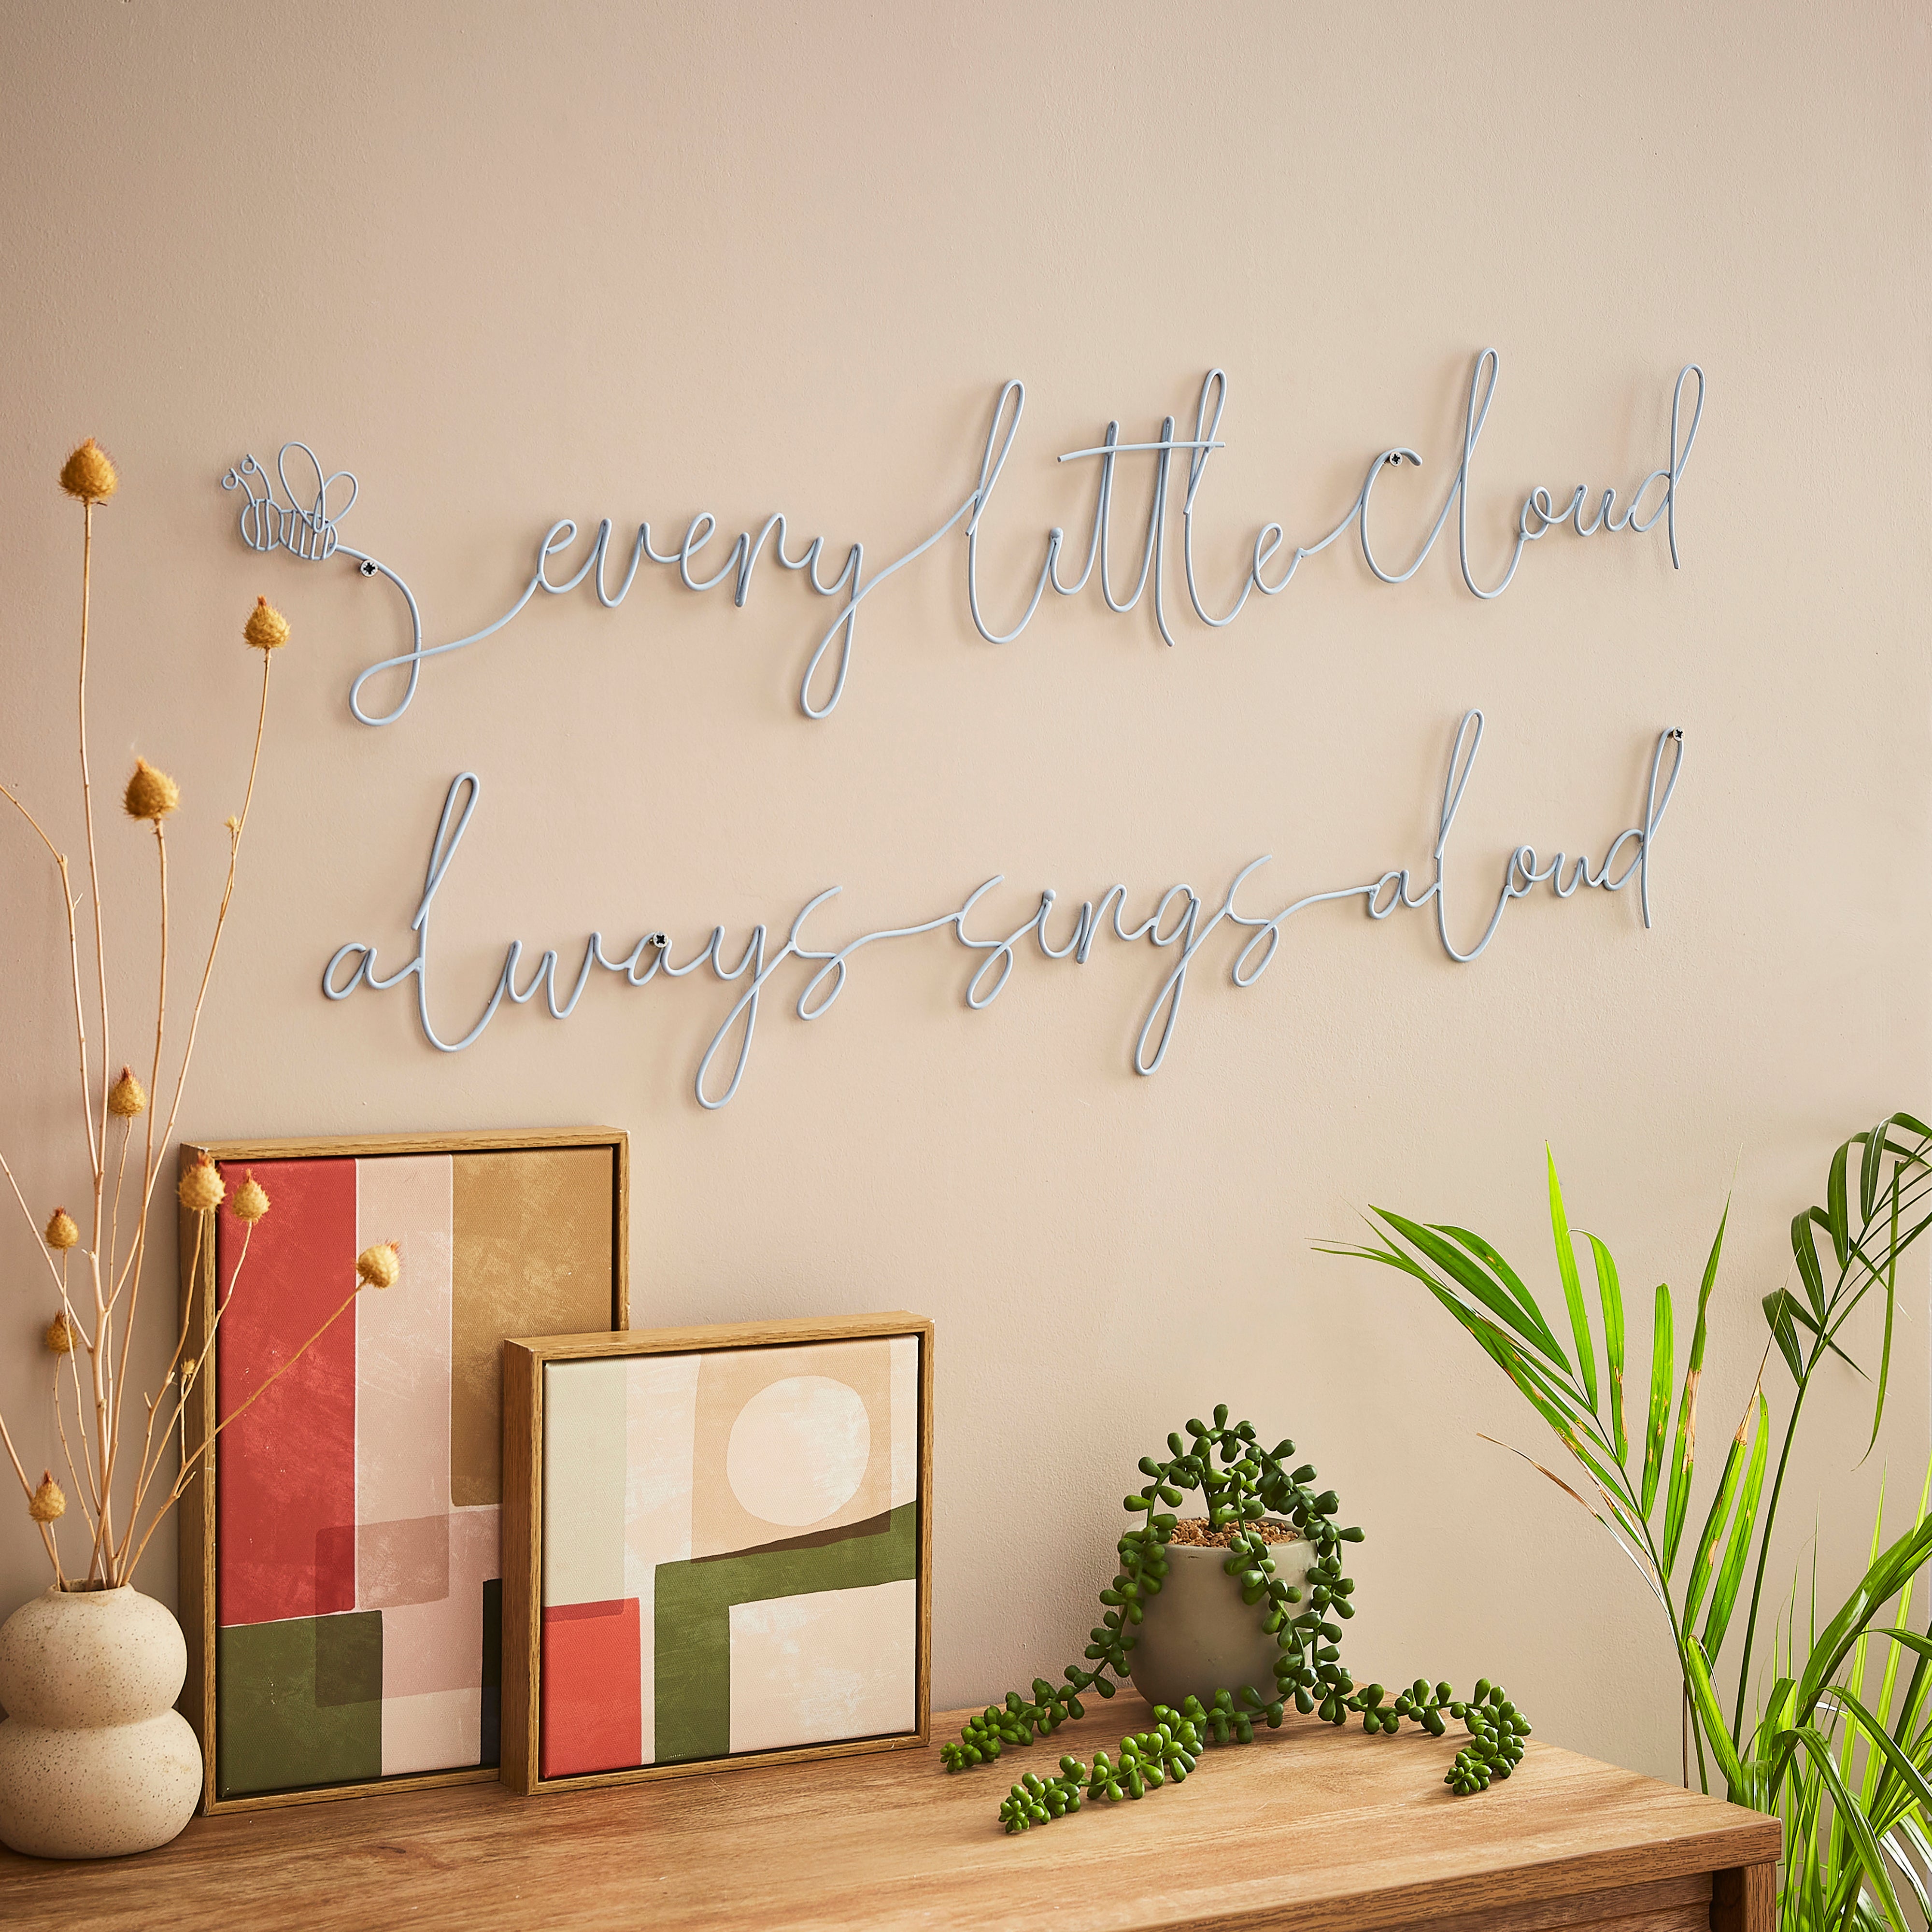 Winnie the Pooh 'Every Cloud' Wire Wall Art